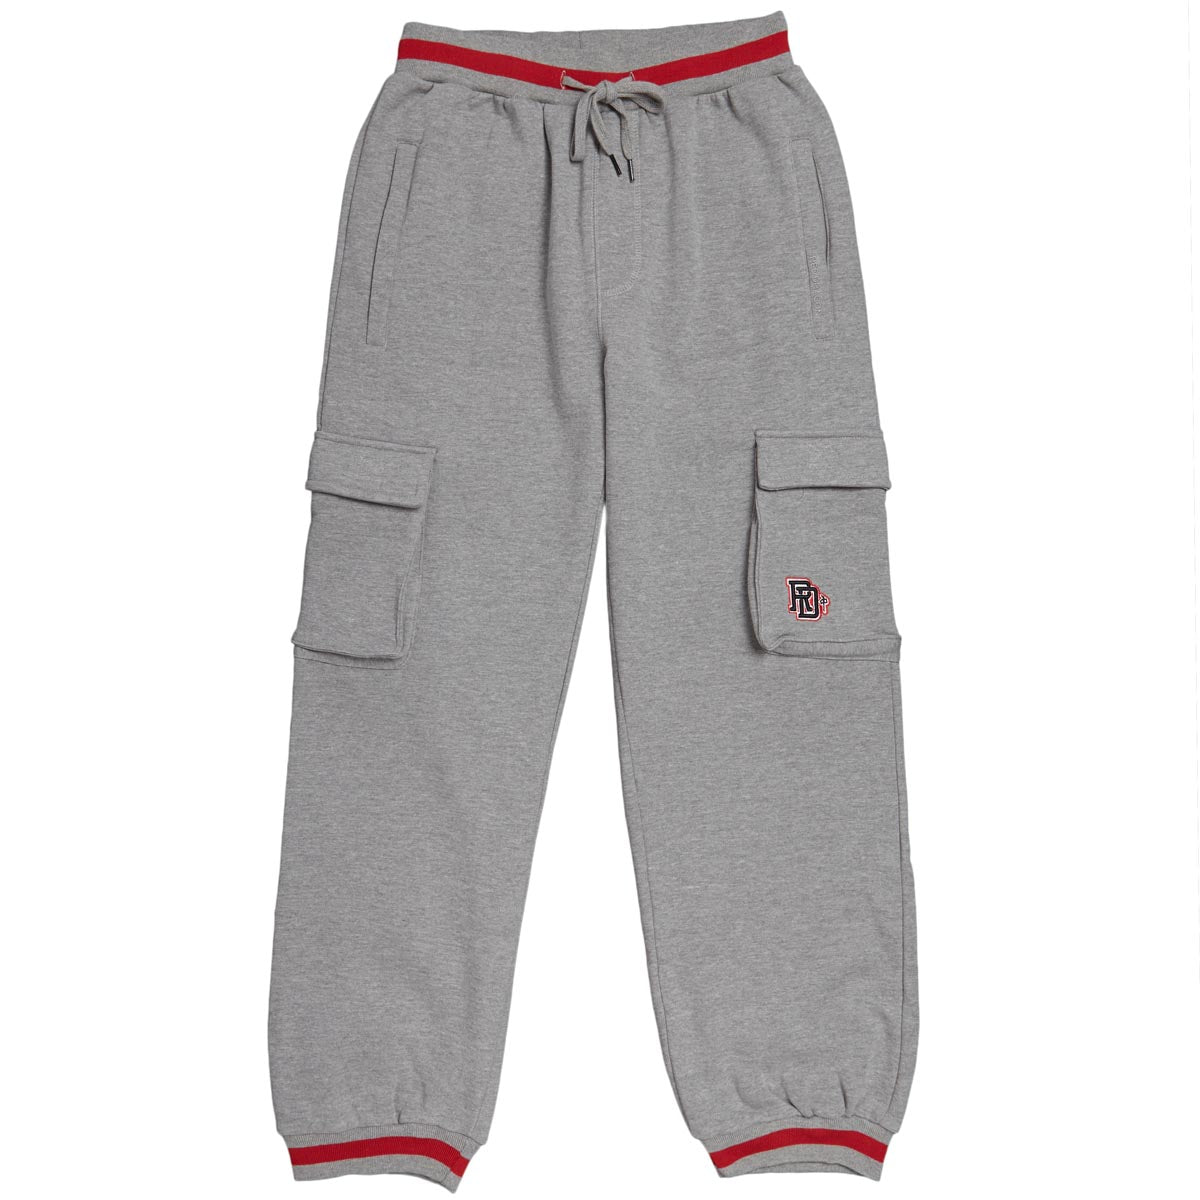 RDS 3d Monogram Cargo Sweat Pants - Athletic Heather/Red image 1